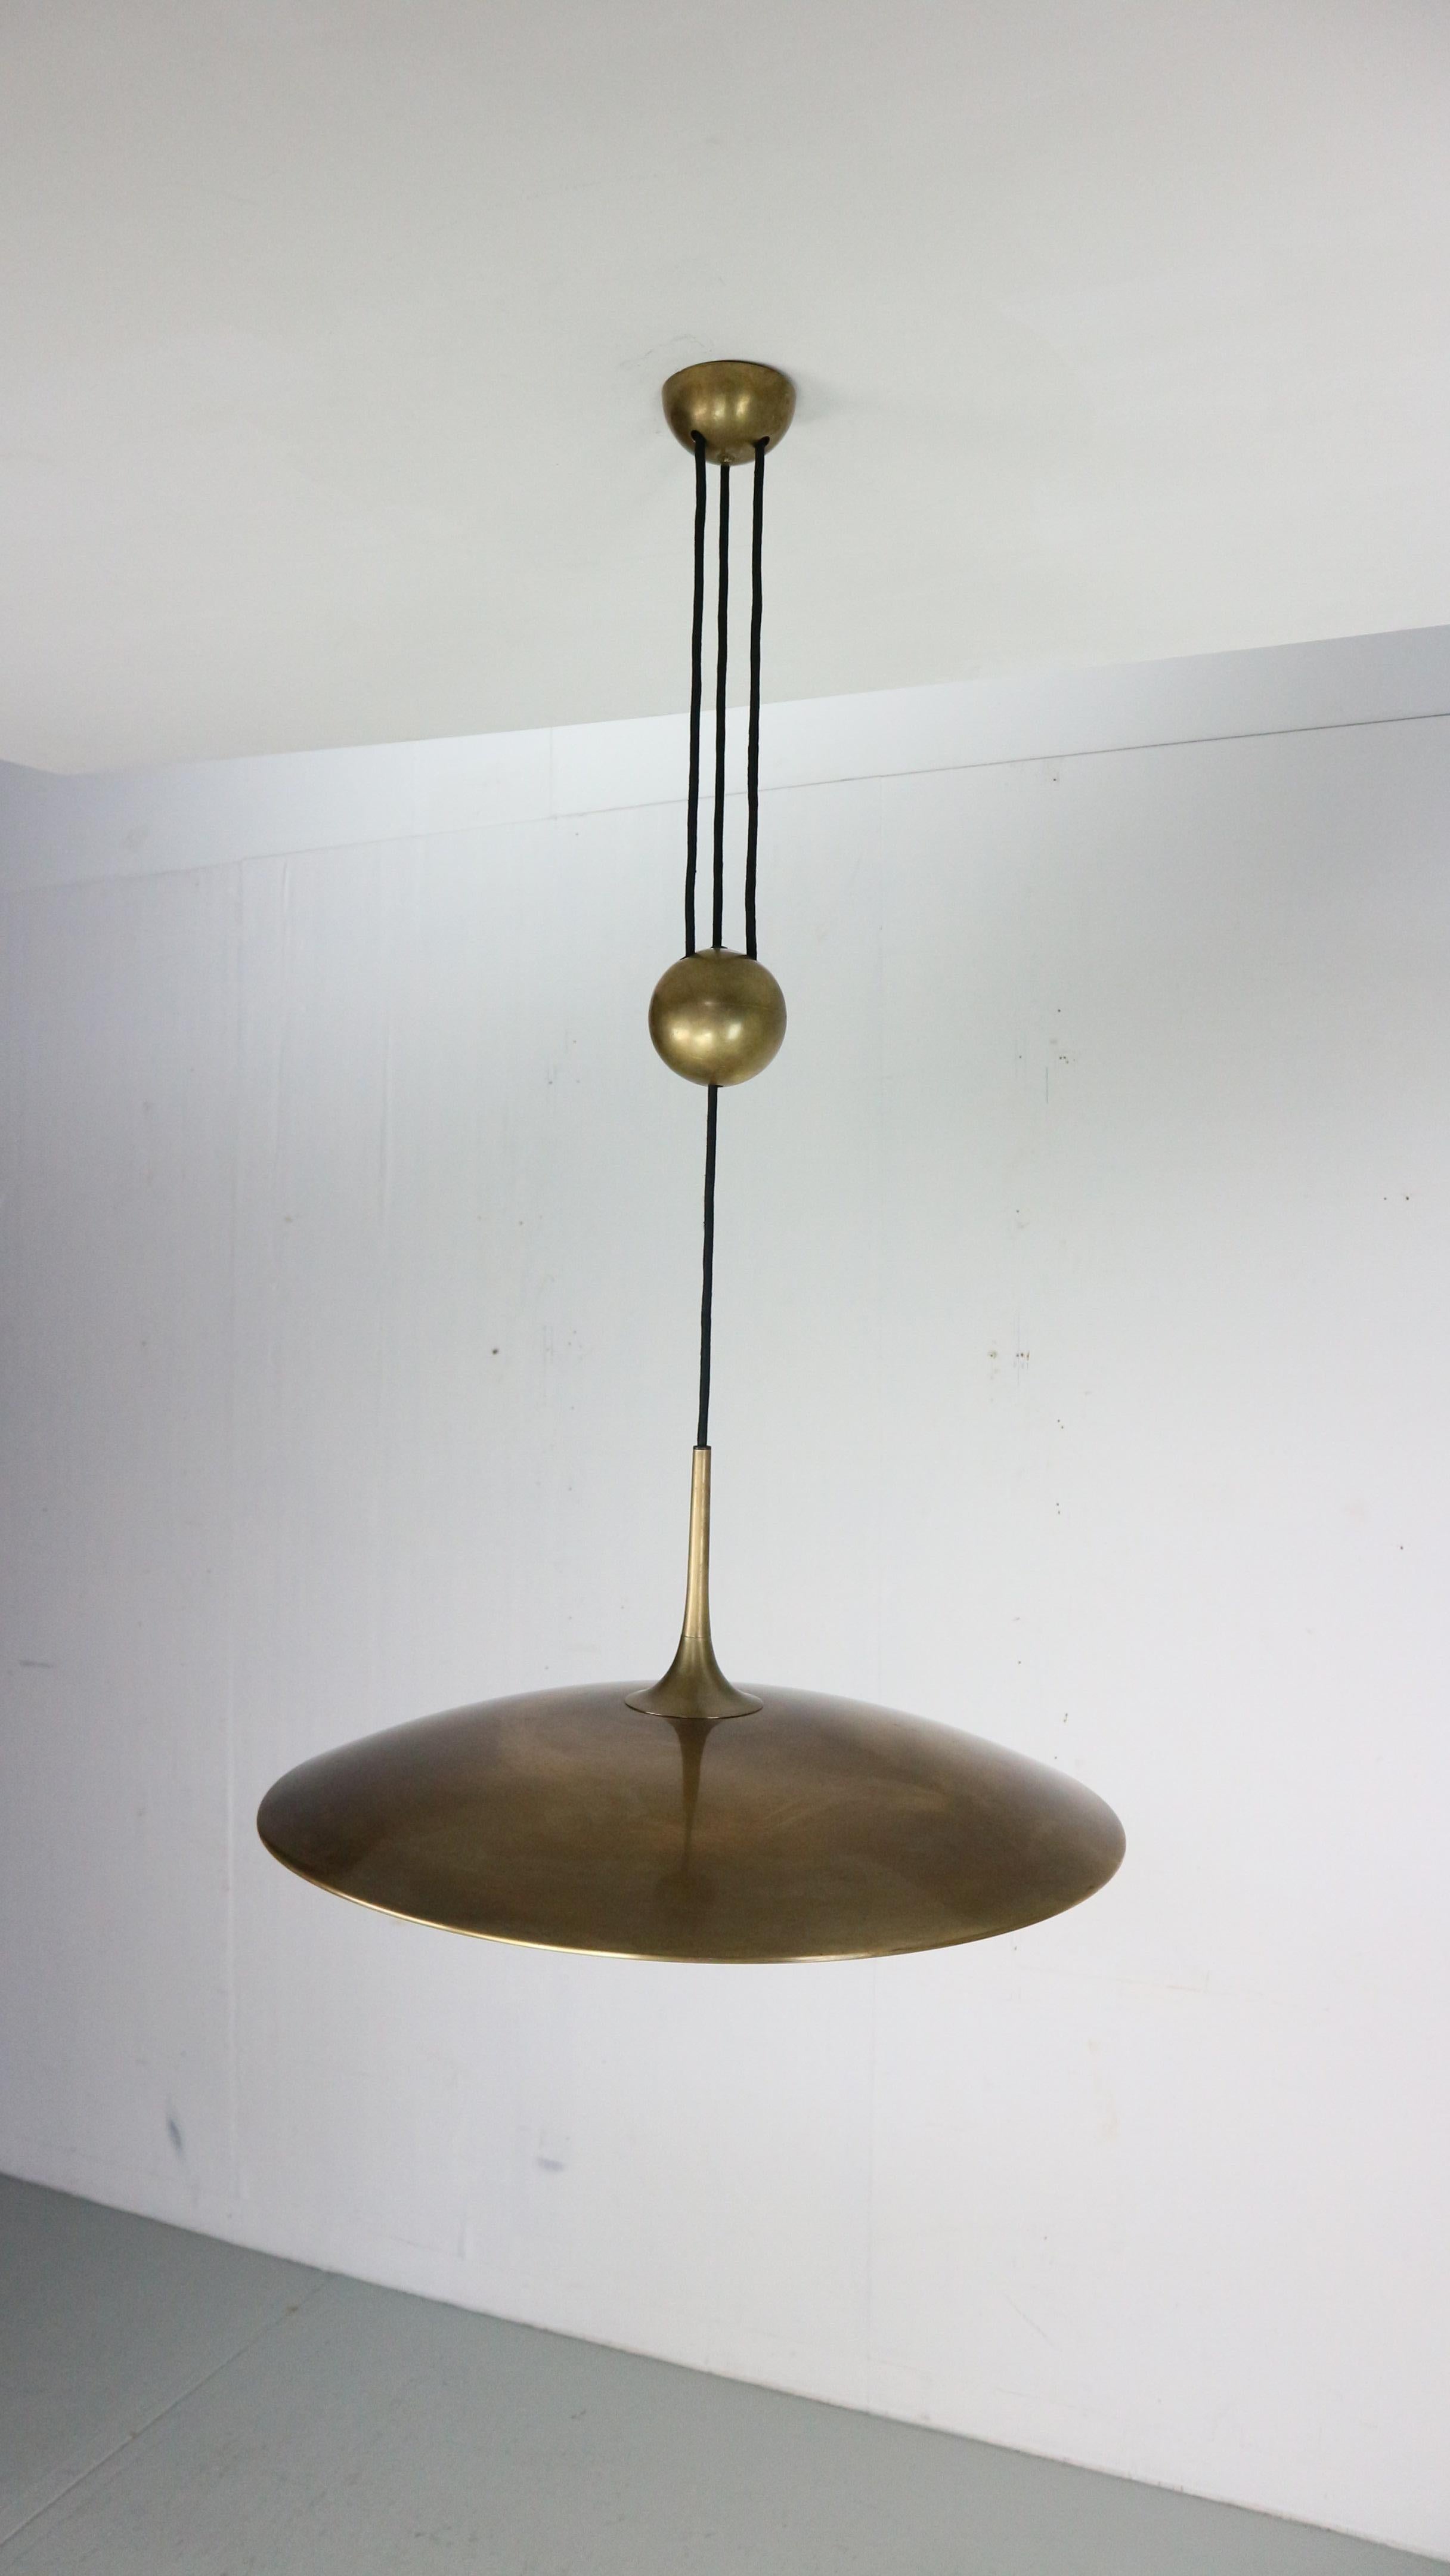 A height adjustable counter weight / balance pendant lamp by Florian Schulz, Germany, manufactured in midcentury, circa 1960 (late 1960s-early 1970s).
The fixture is made of solid brass with a natural aged and patinated surface in a rich and warm